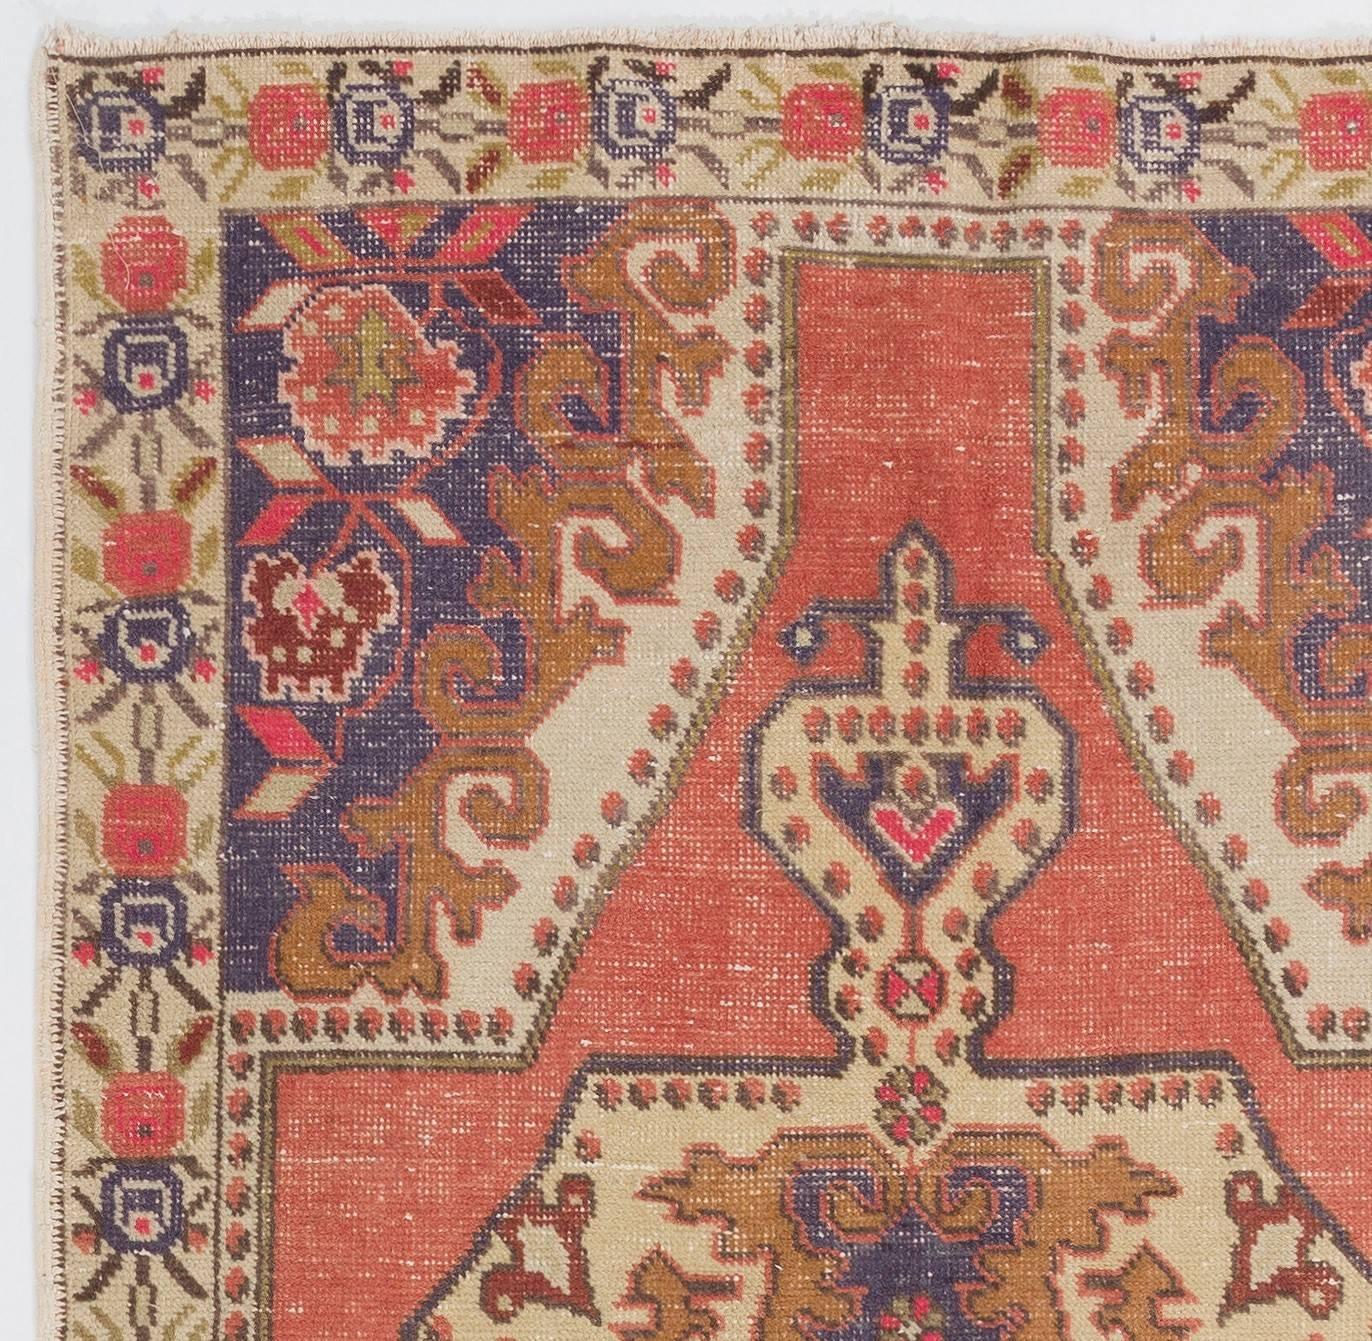 A vintage village rug from Turkey. It is made of medium wool pile on wool foundation and features a large medallion at its center, floral corner pieces and a floral main border in dark blue, light brown and grass green against a rich coral pink and